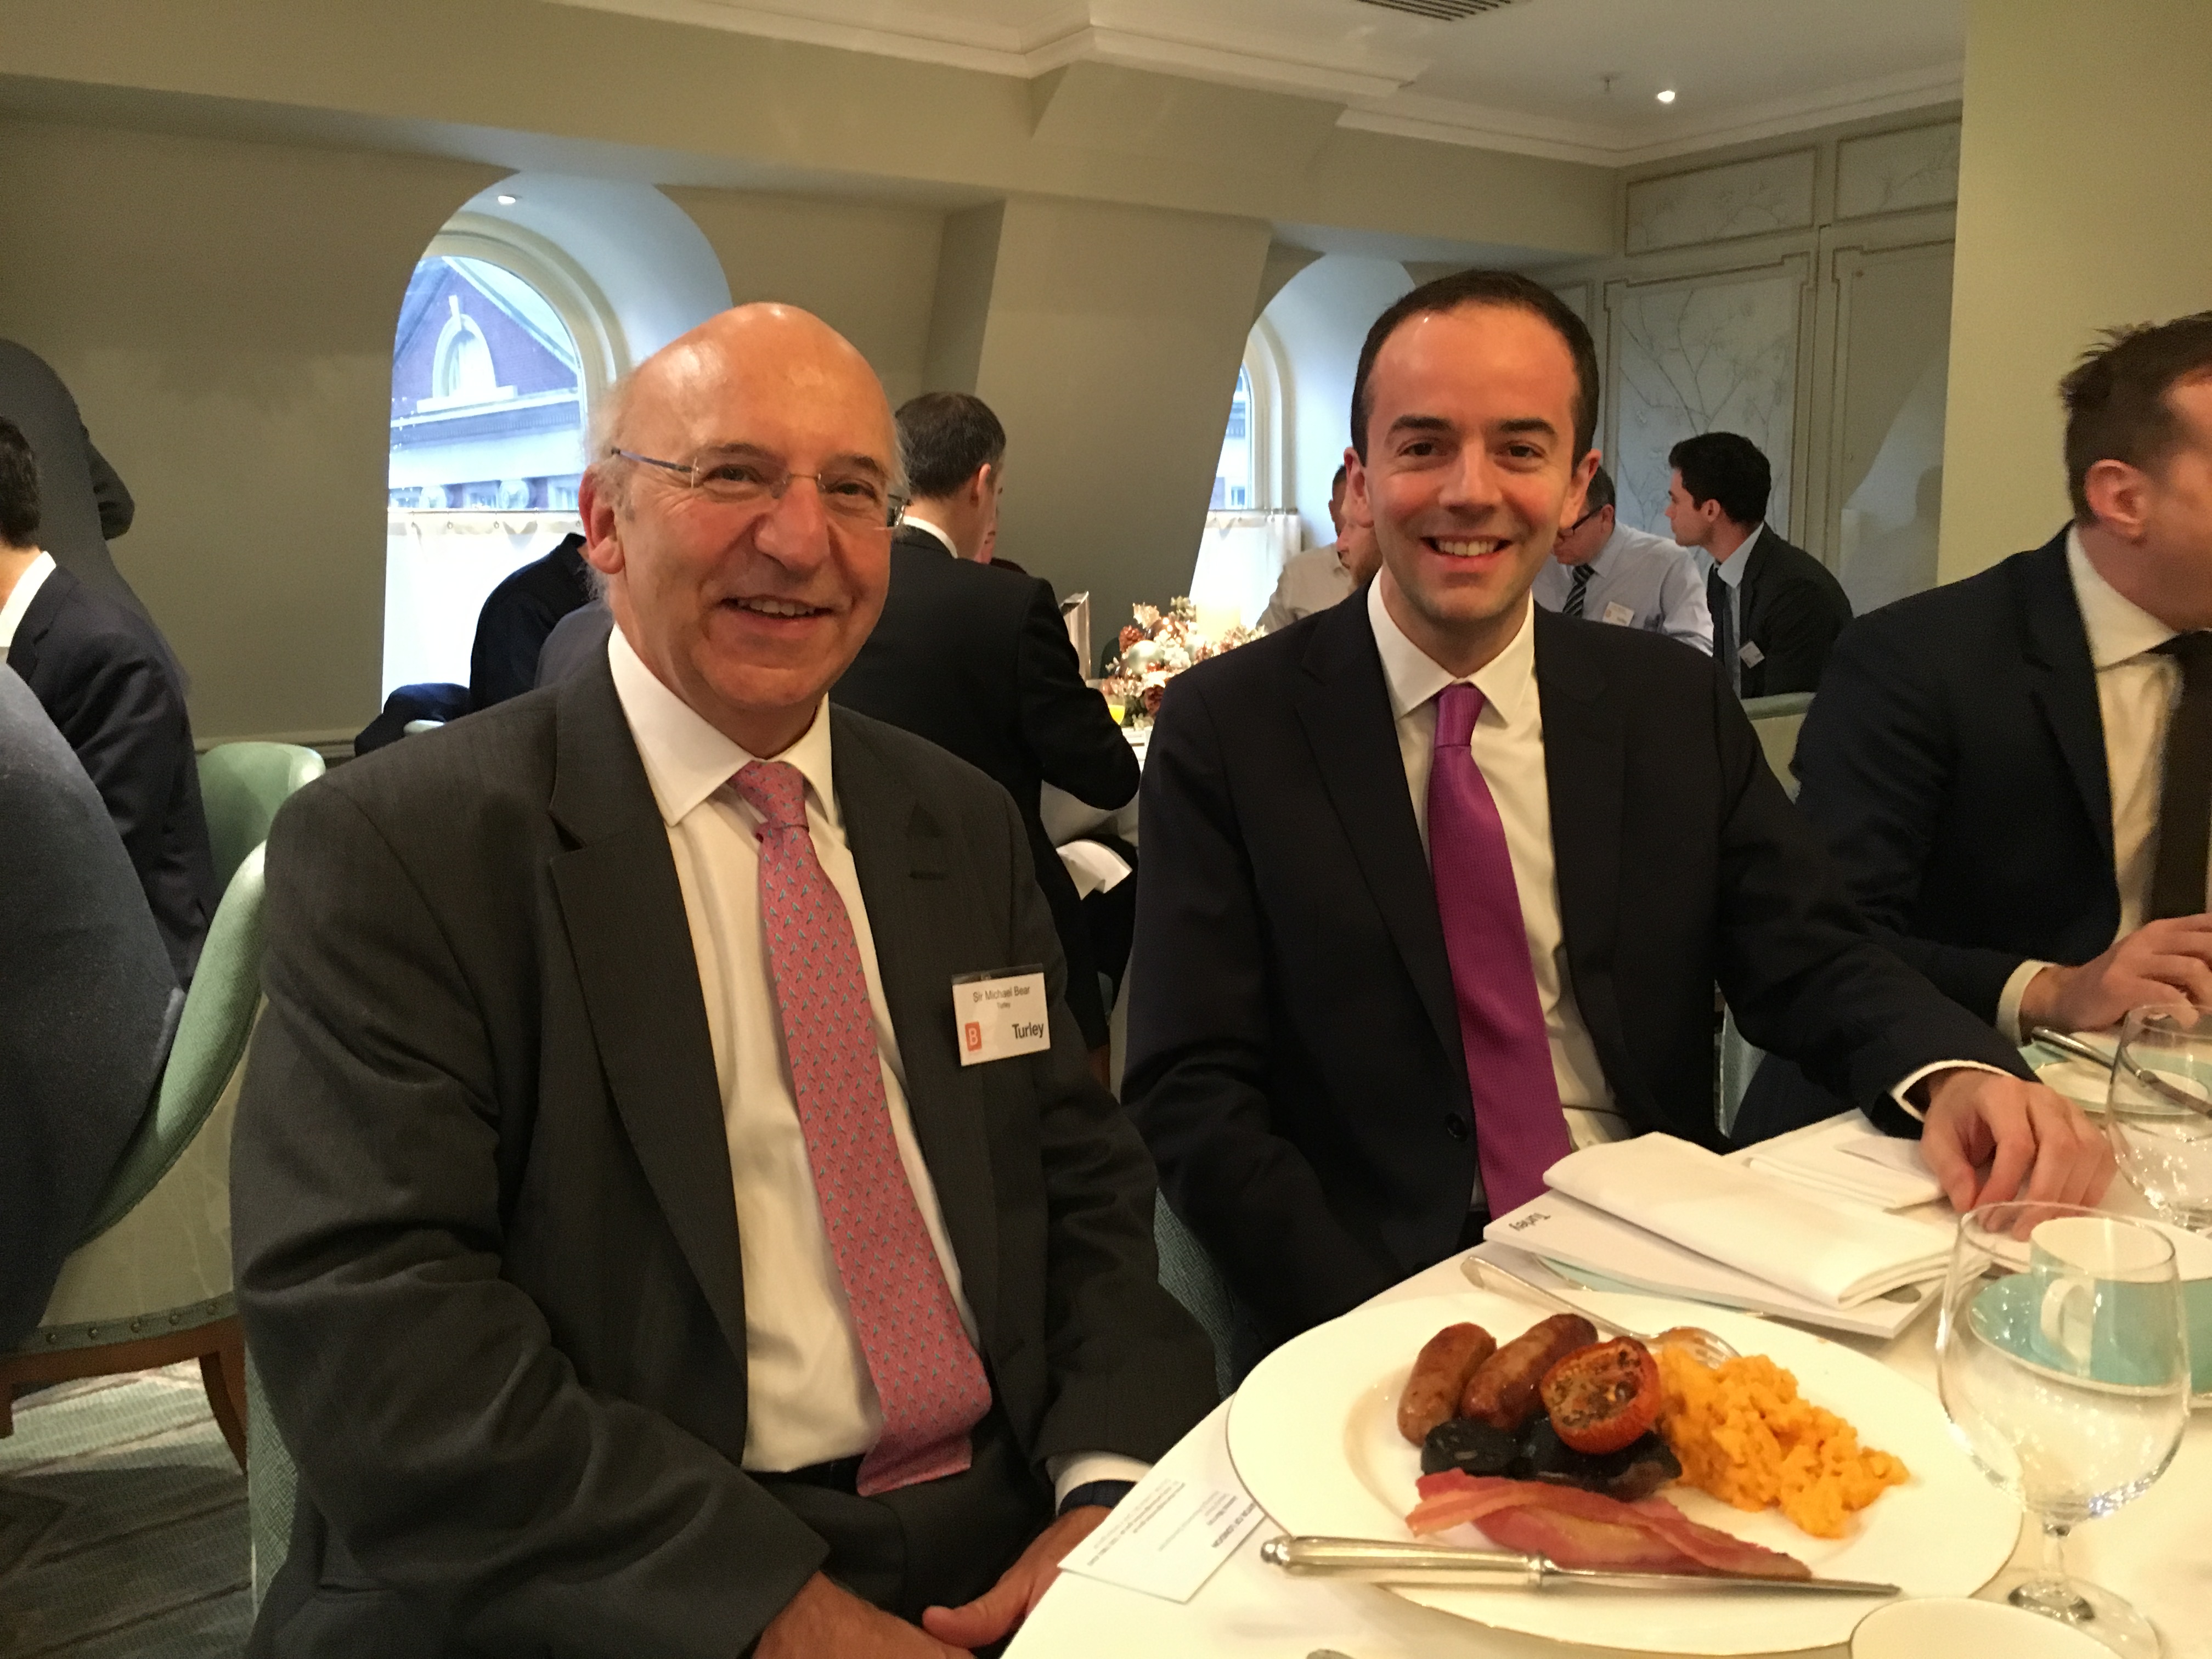 Sir Michael Bear at the James Murray Breakfast event